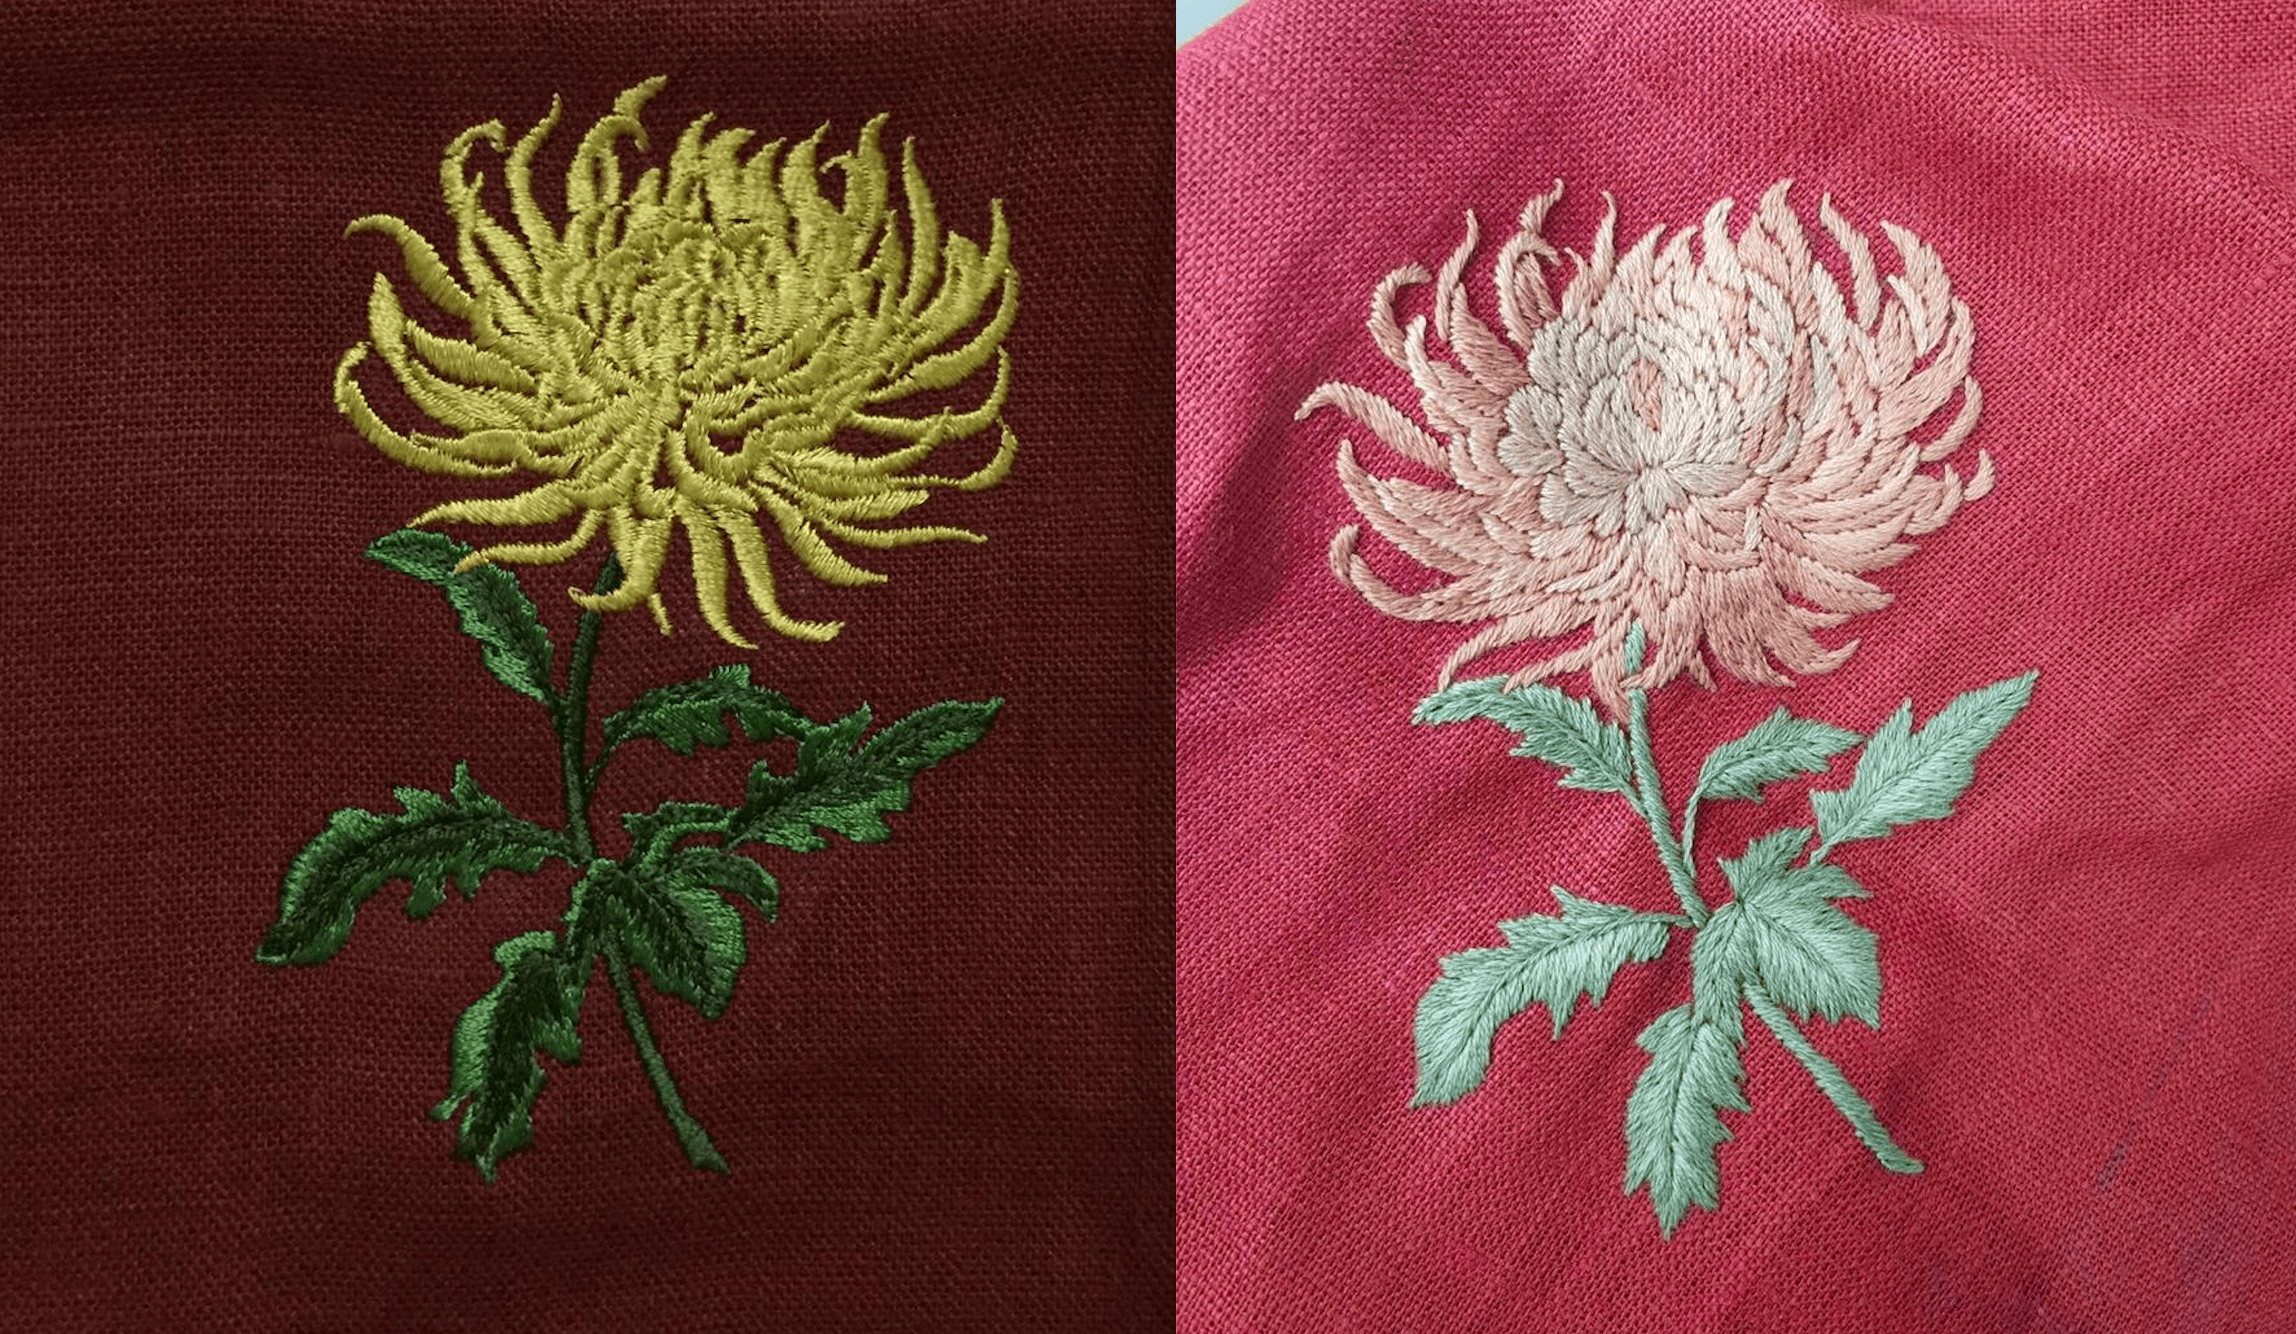 Difference between machine embroidery and hand embroidery